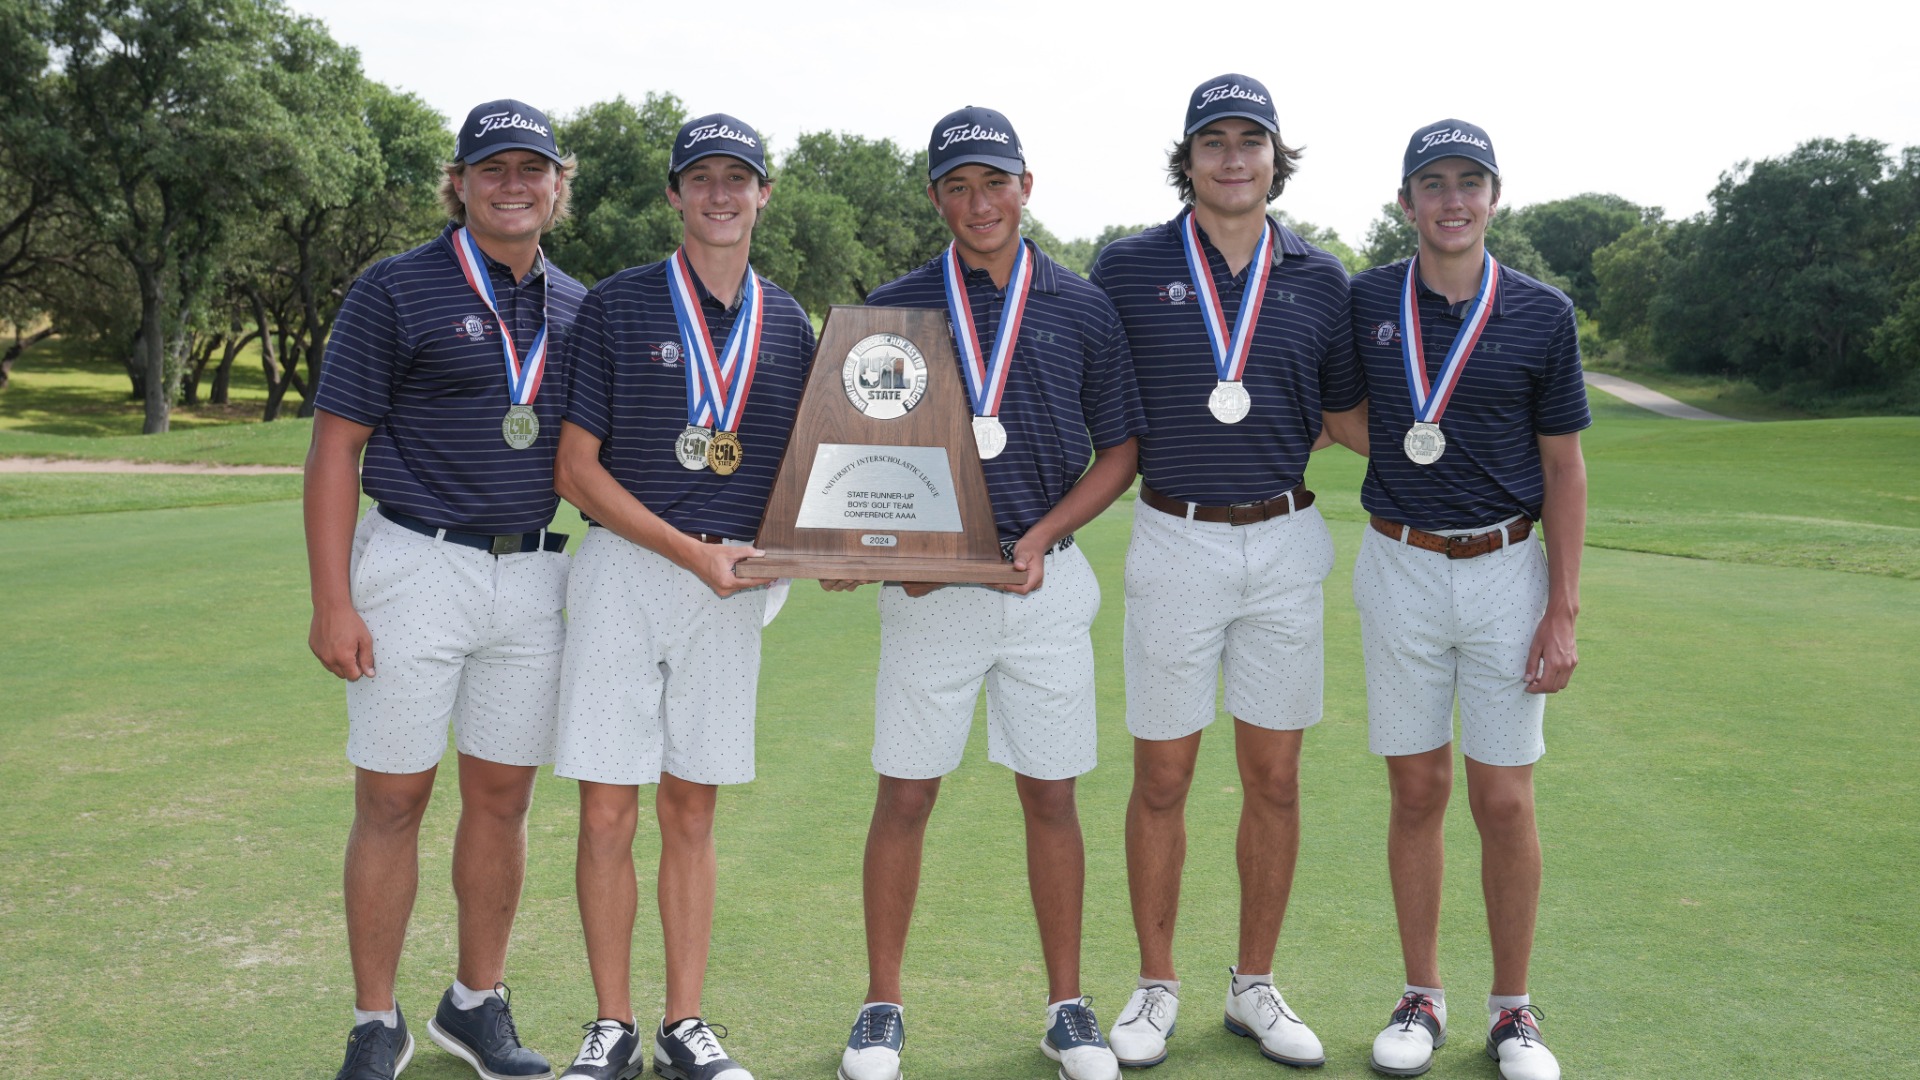 Slide 0 - Boys Golf wins 2nd Place at State Golf Championship